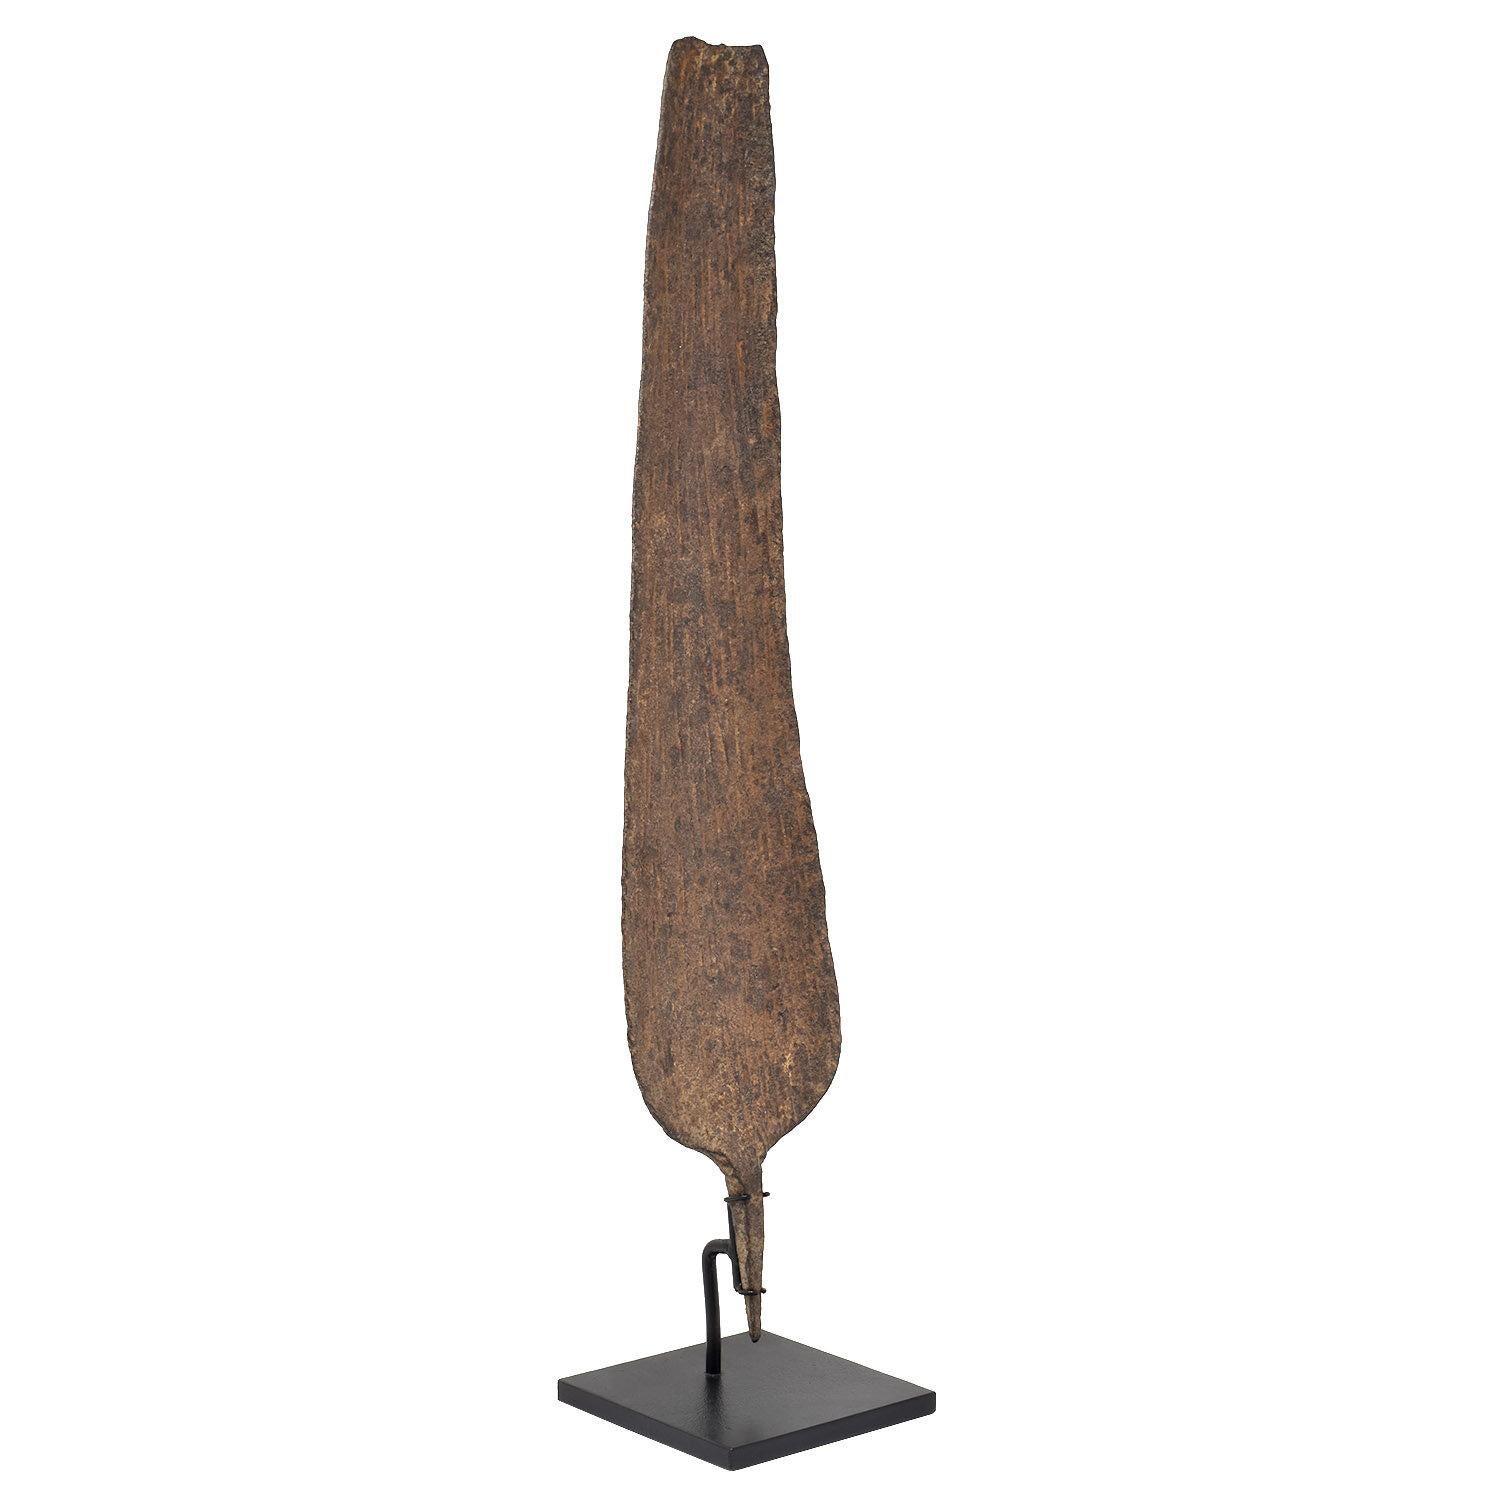 This currency object belongs to a group of hoe-currencies that were produced in various shapes in eastern Nigeria. They are typically covered in brush-shaped lines, scratches, or engravings. The Chamba blacksmiths are very skilled craftsmen who